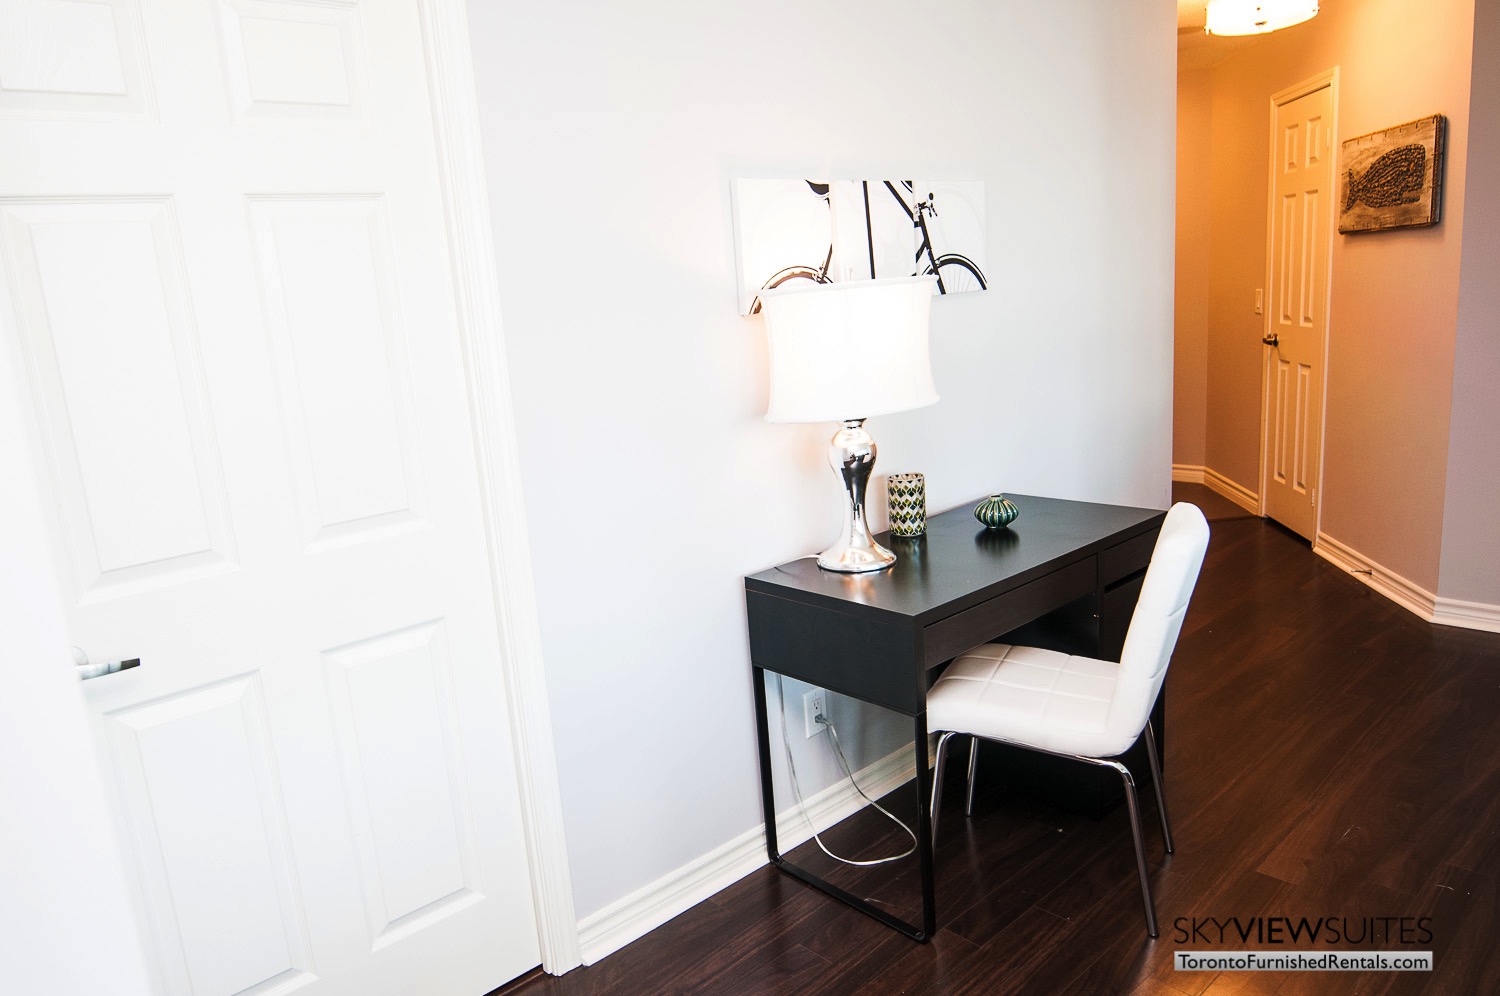 Grand Trunk condos Toronto fully furnished desk